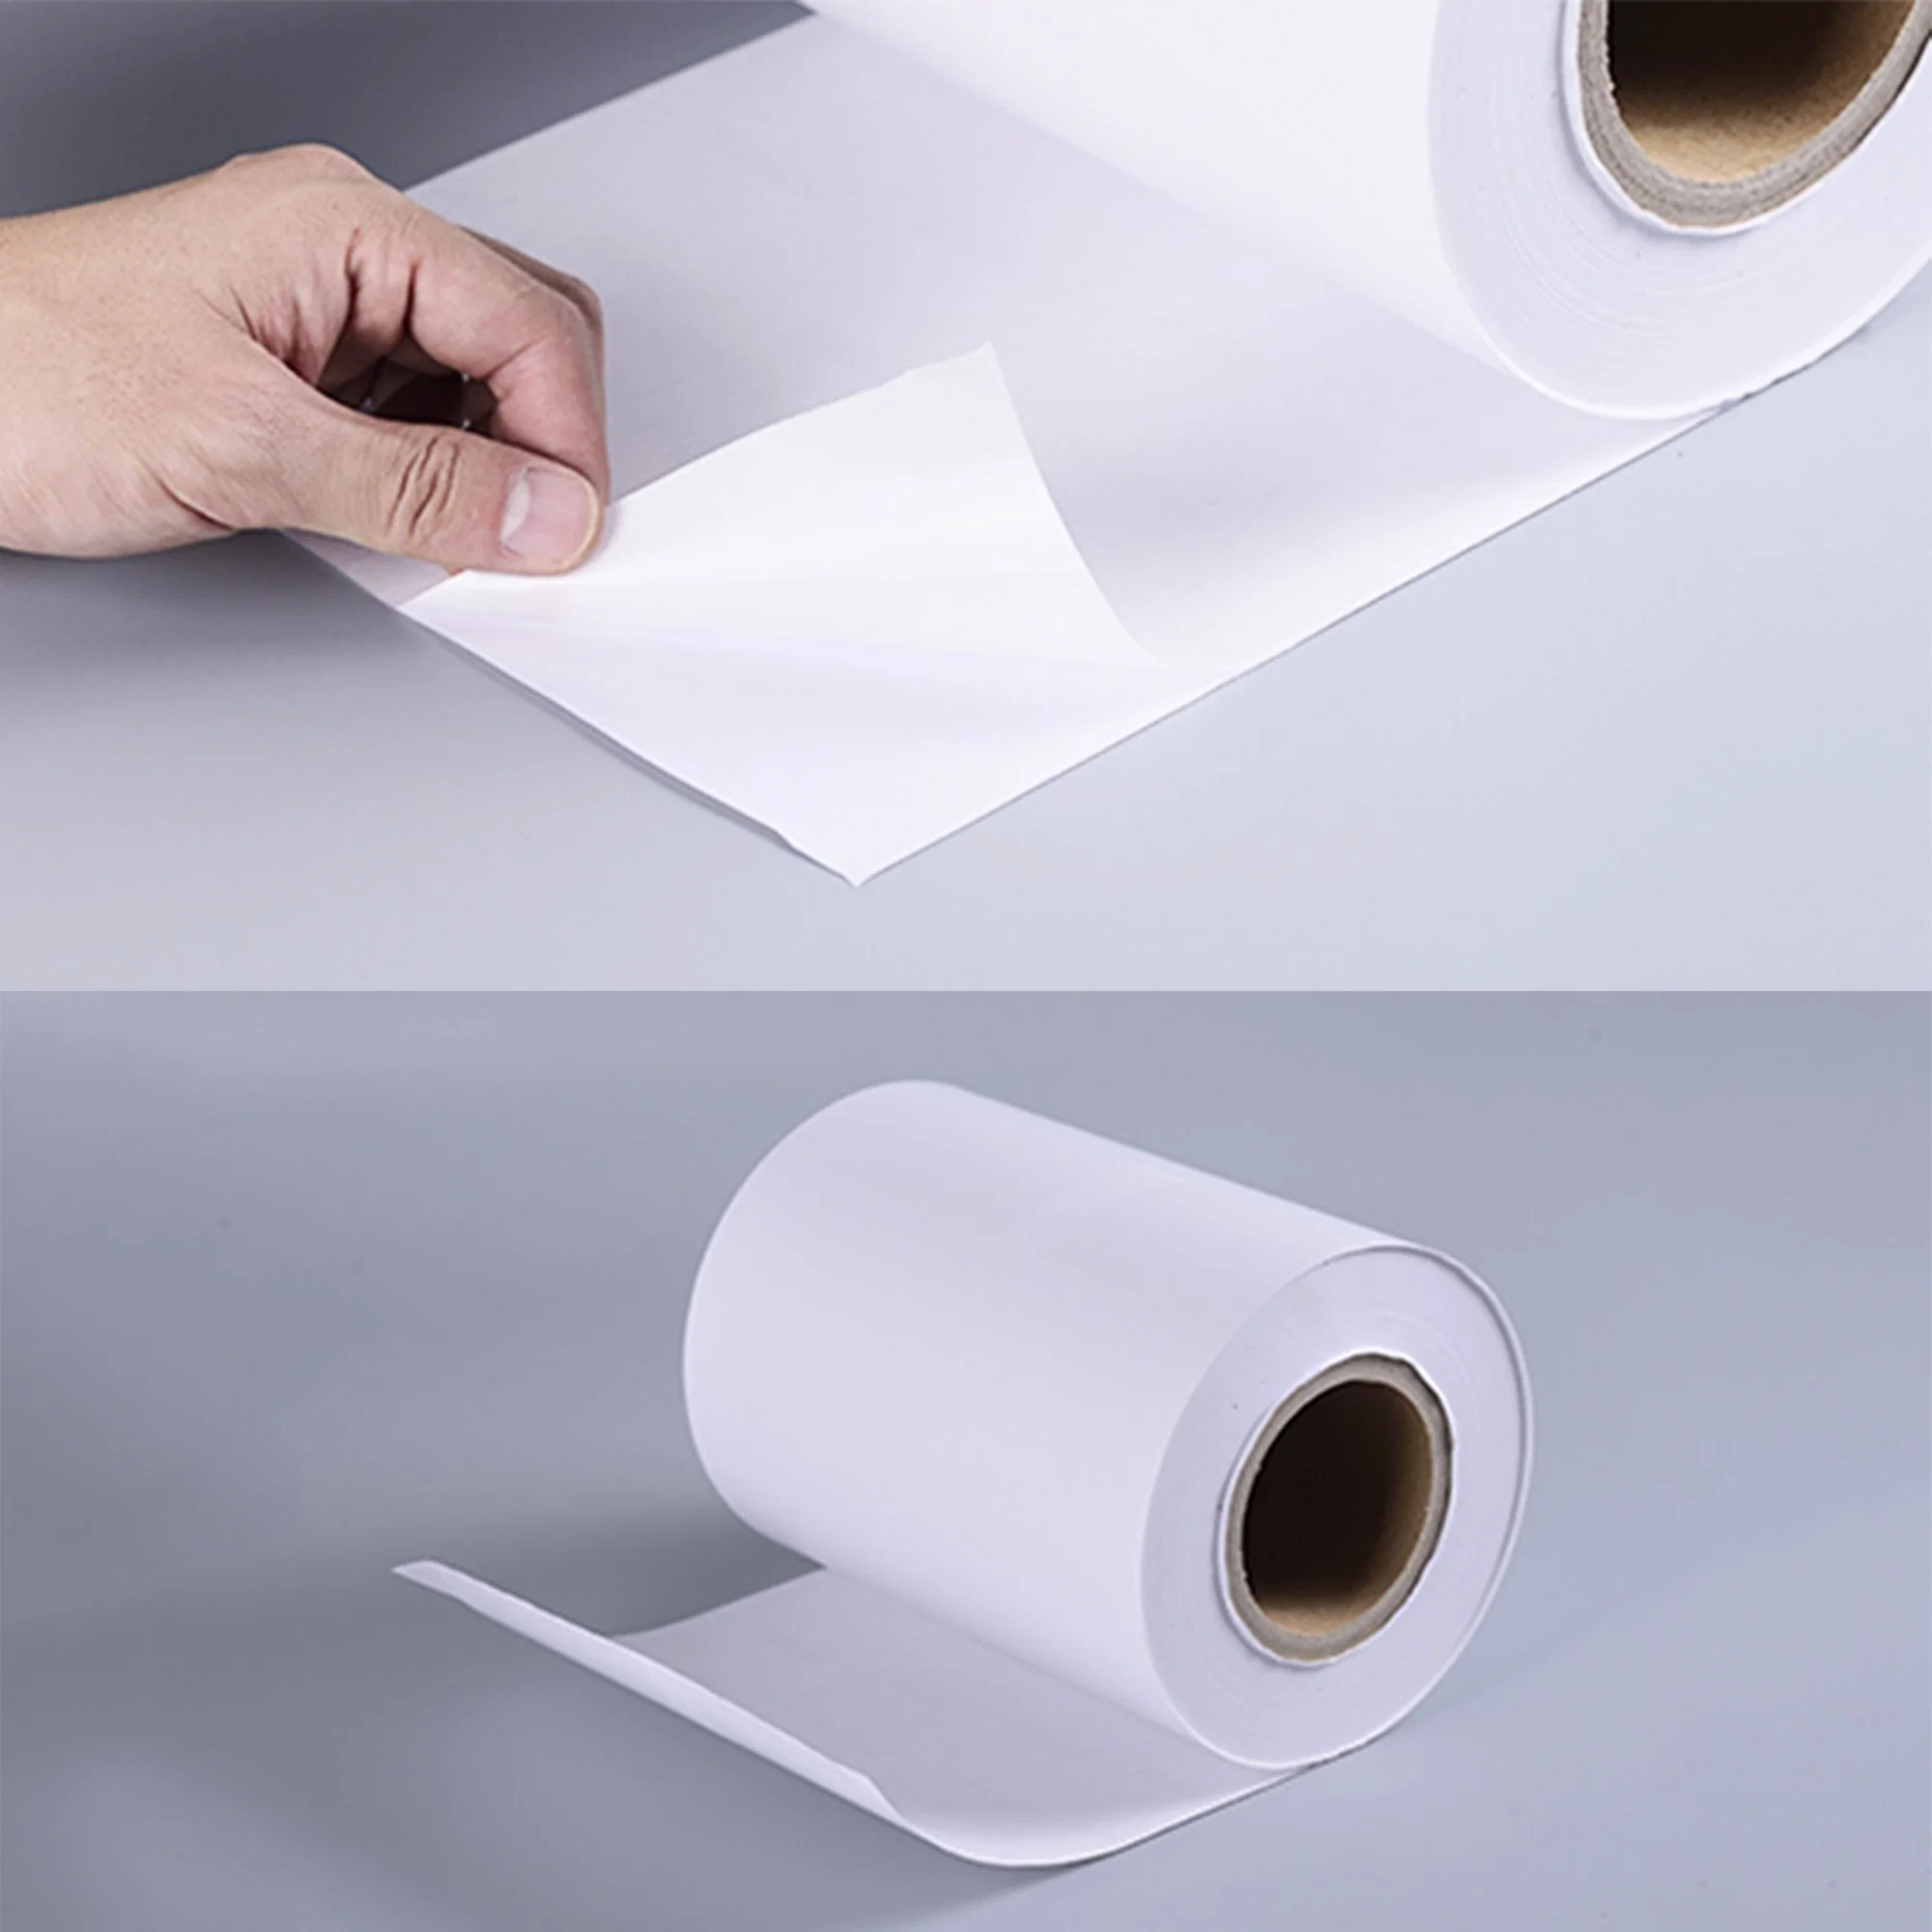 Self Adhesive Direct Thermal Label Material in Jumbo Roll for Shipping Logistics Sticker Label-70gthermal Paper/16g Hot Glue/58g White Glassine-1.55m and 1.09m